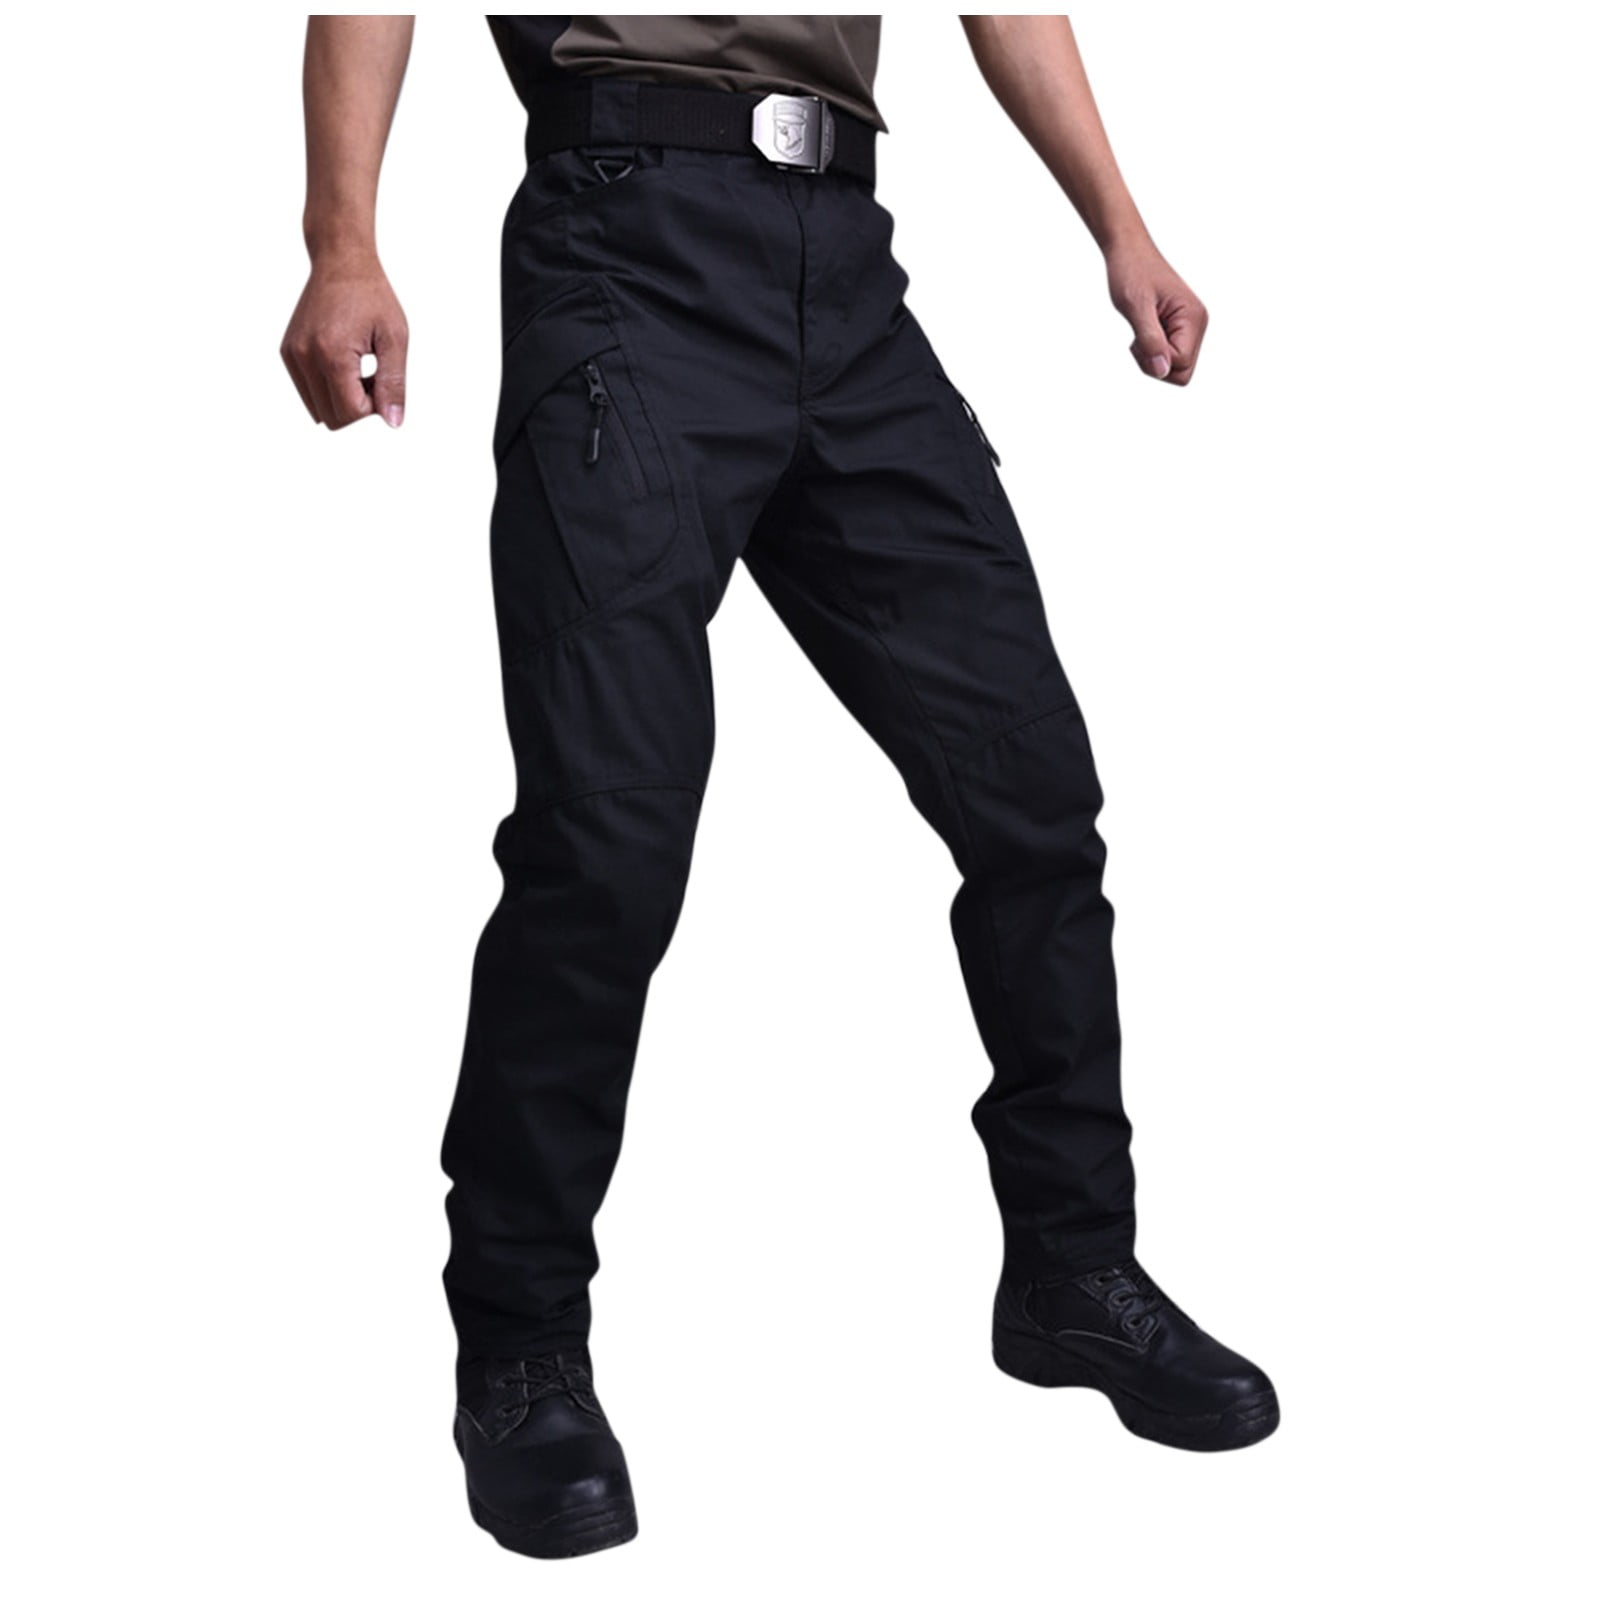 TQWQT Men's Hiking Pants Casual Joggers Athletic Pants Loose Fit Hiking Trousers  Outdoor Wearing Pants with Pockets,Black M 